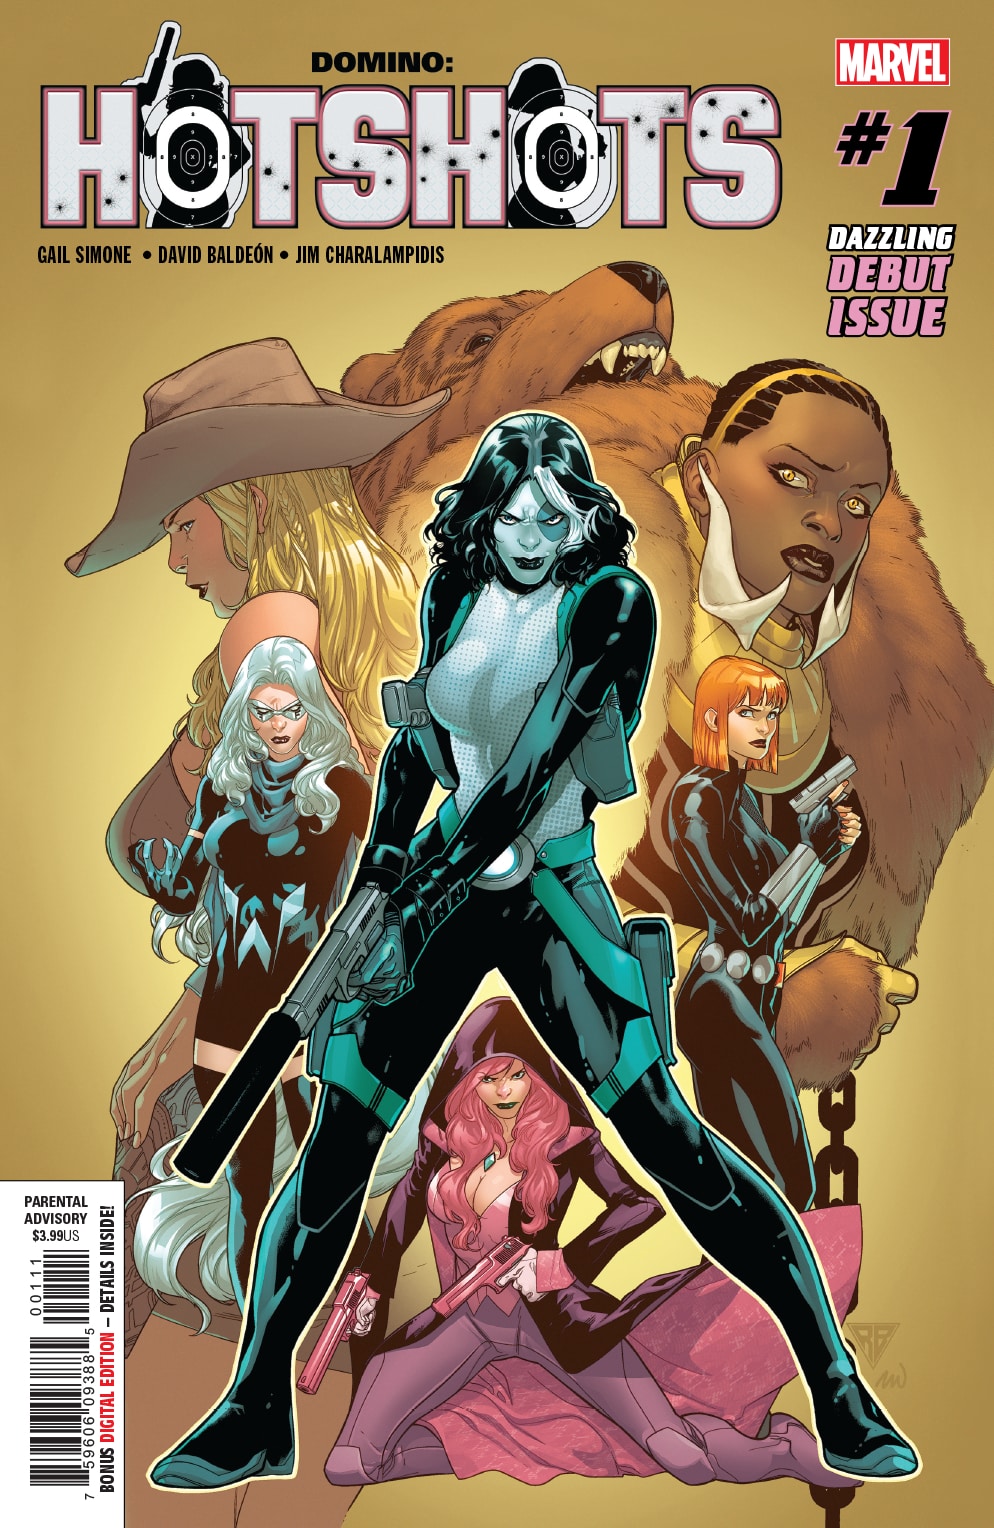 Gail Simone Says We Could Get More Domino After Hotshots The Most Efffed Up Thing She S Ever Written